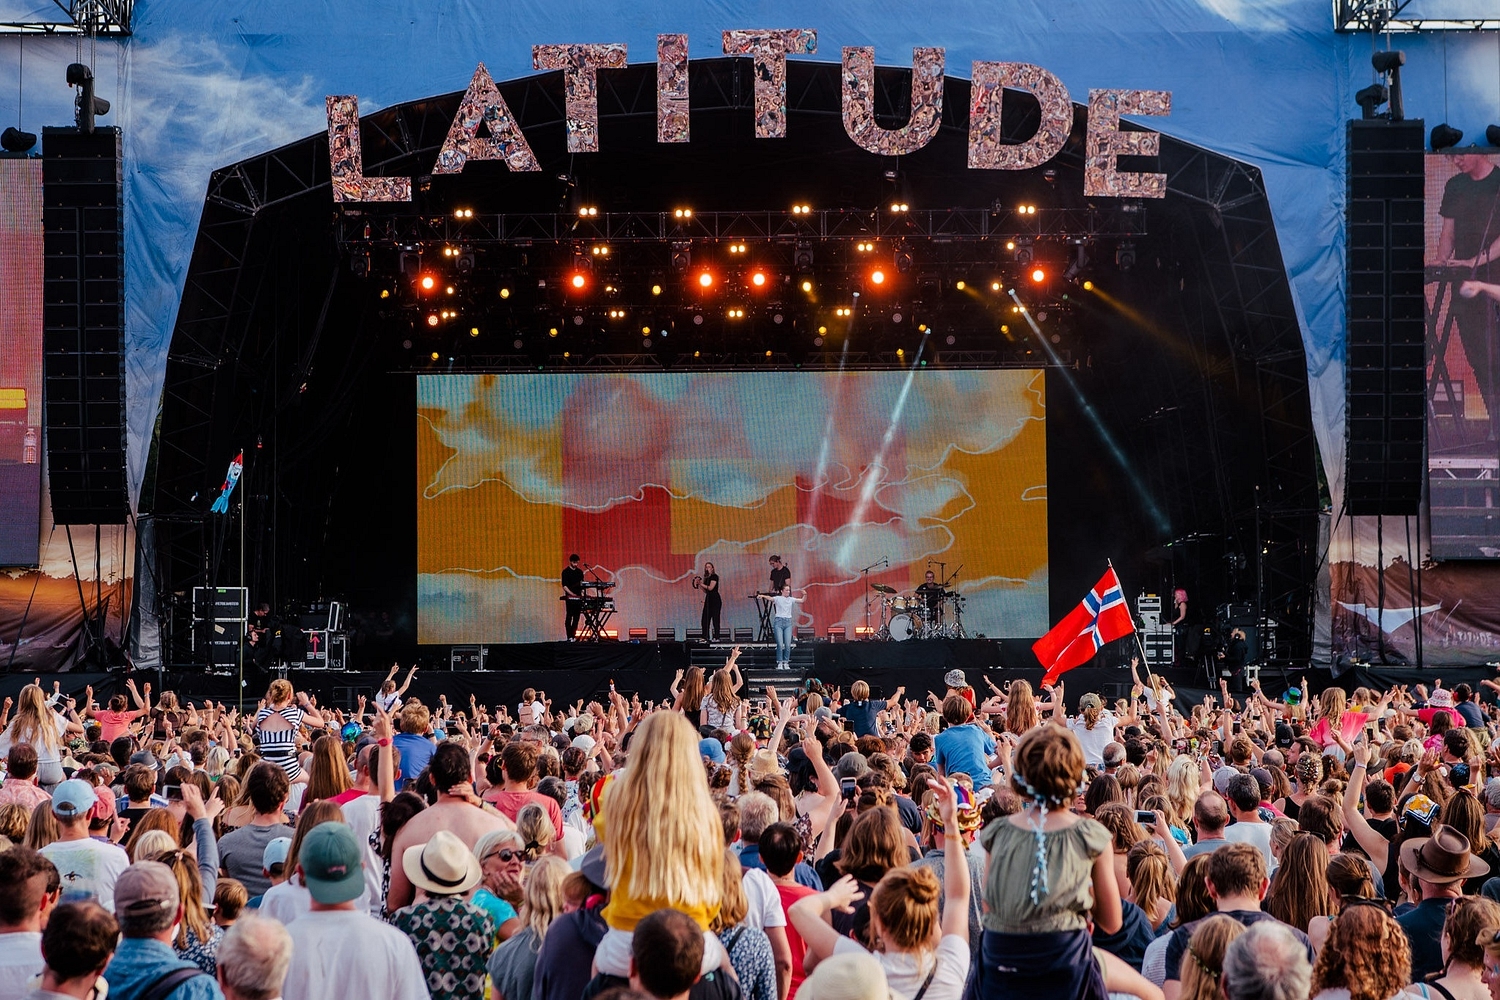 Latitude, Download, and Isle of Wight Festivals all remove Barclays partnership following band boycott